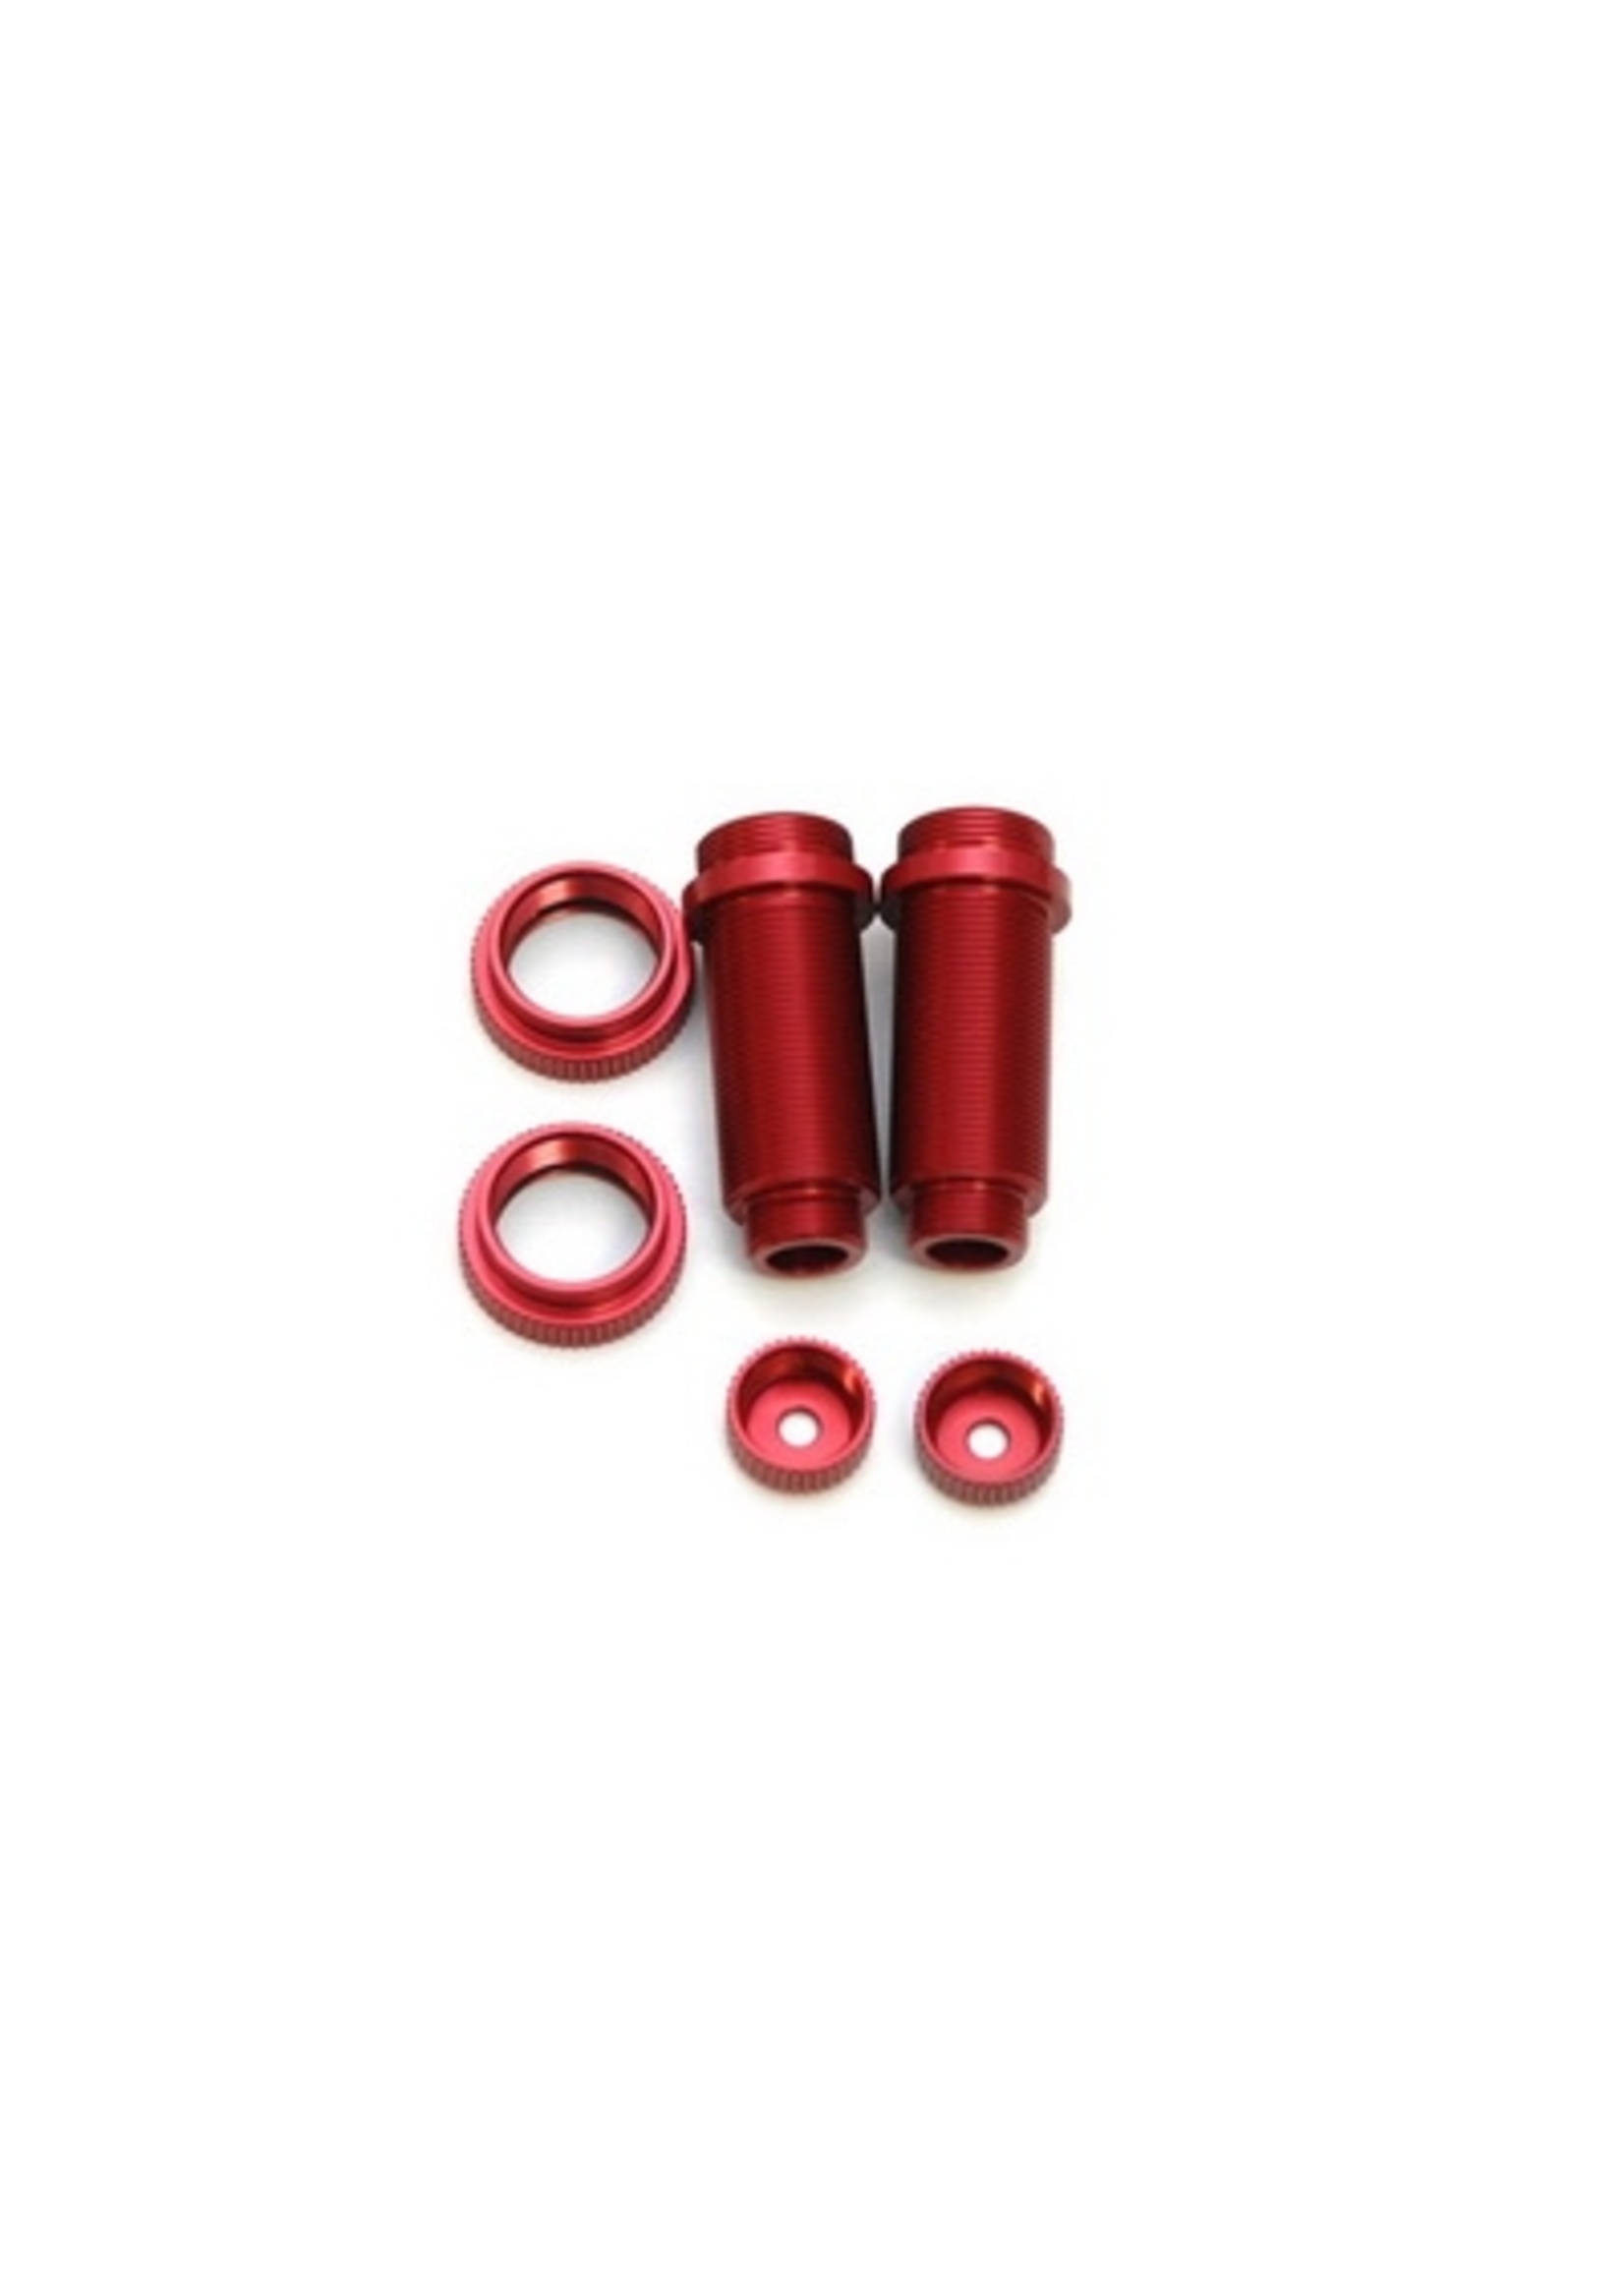 ST Racing Concepts SPTST3765XR ST Racing Concepts Aluminum Threaded Front Shock Body Set (Red) (2) (Slash)